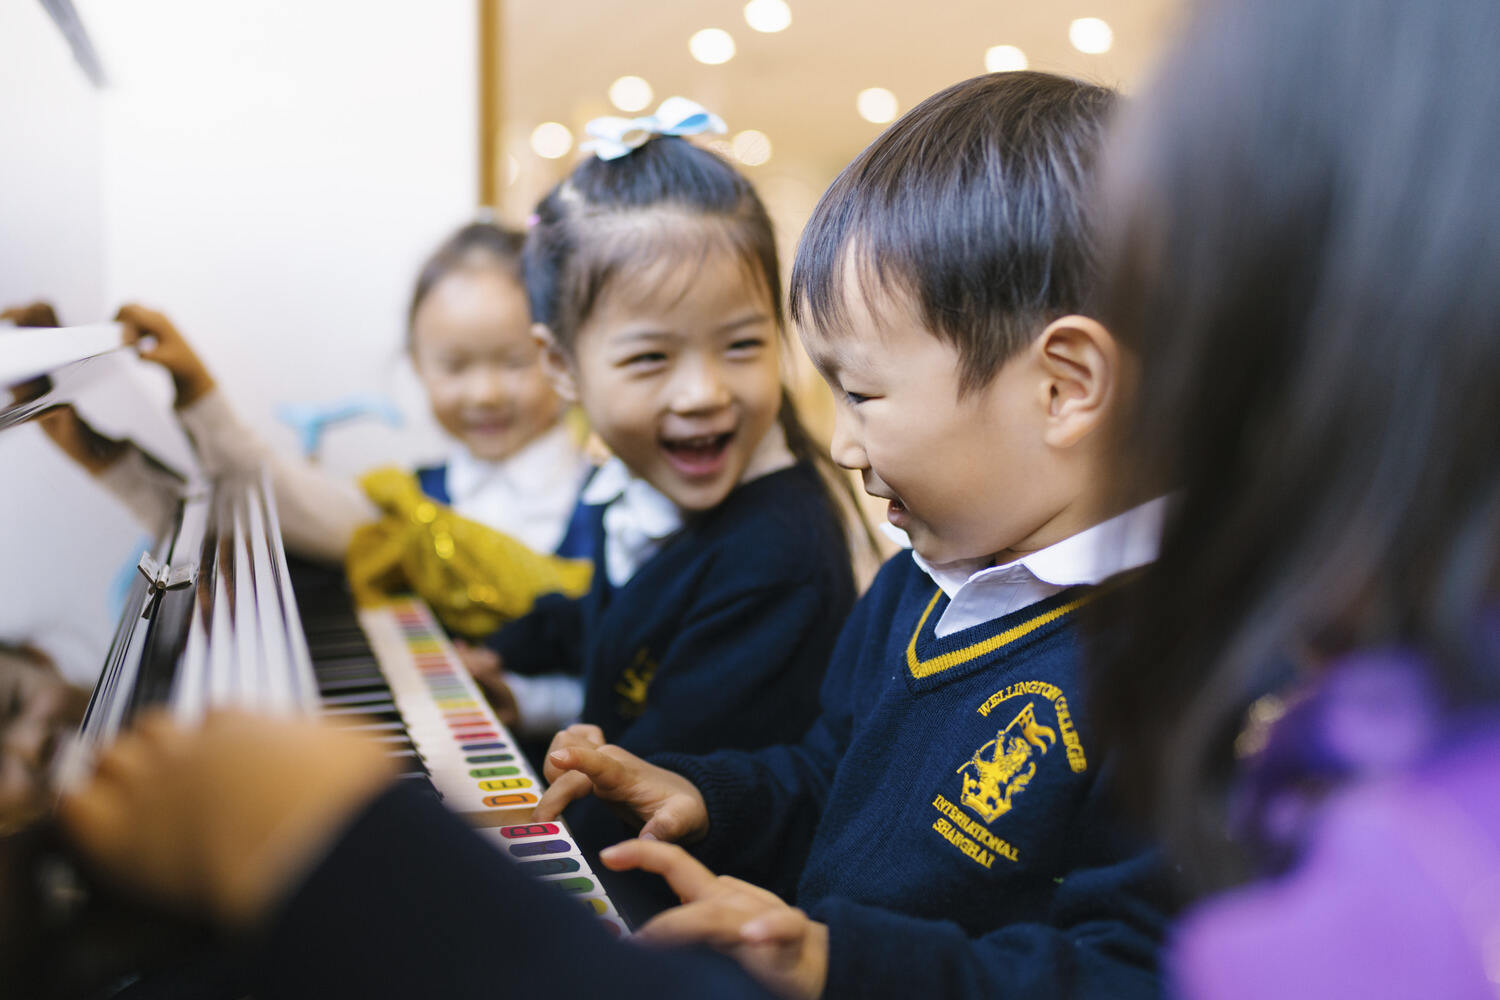 Developing values through Early Years education at Huili